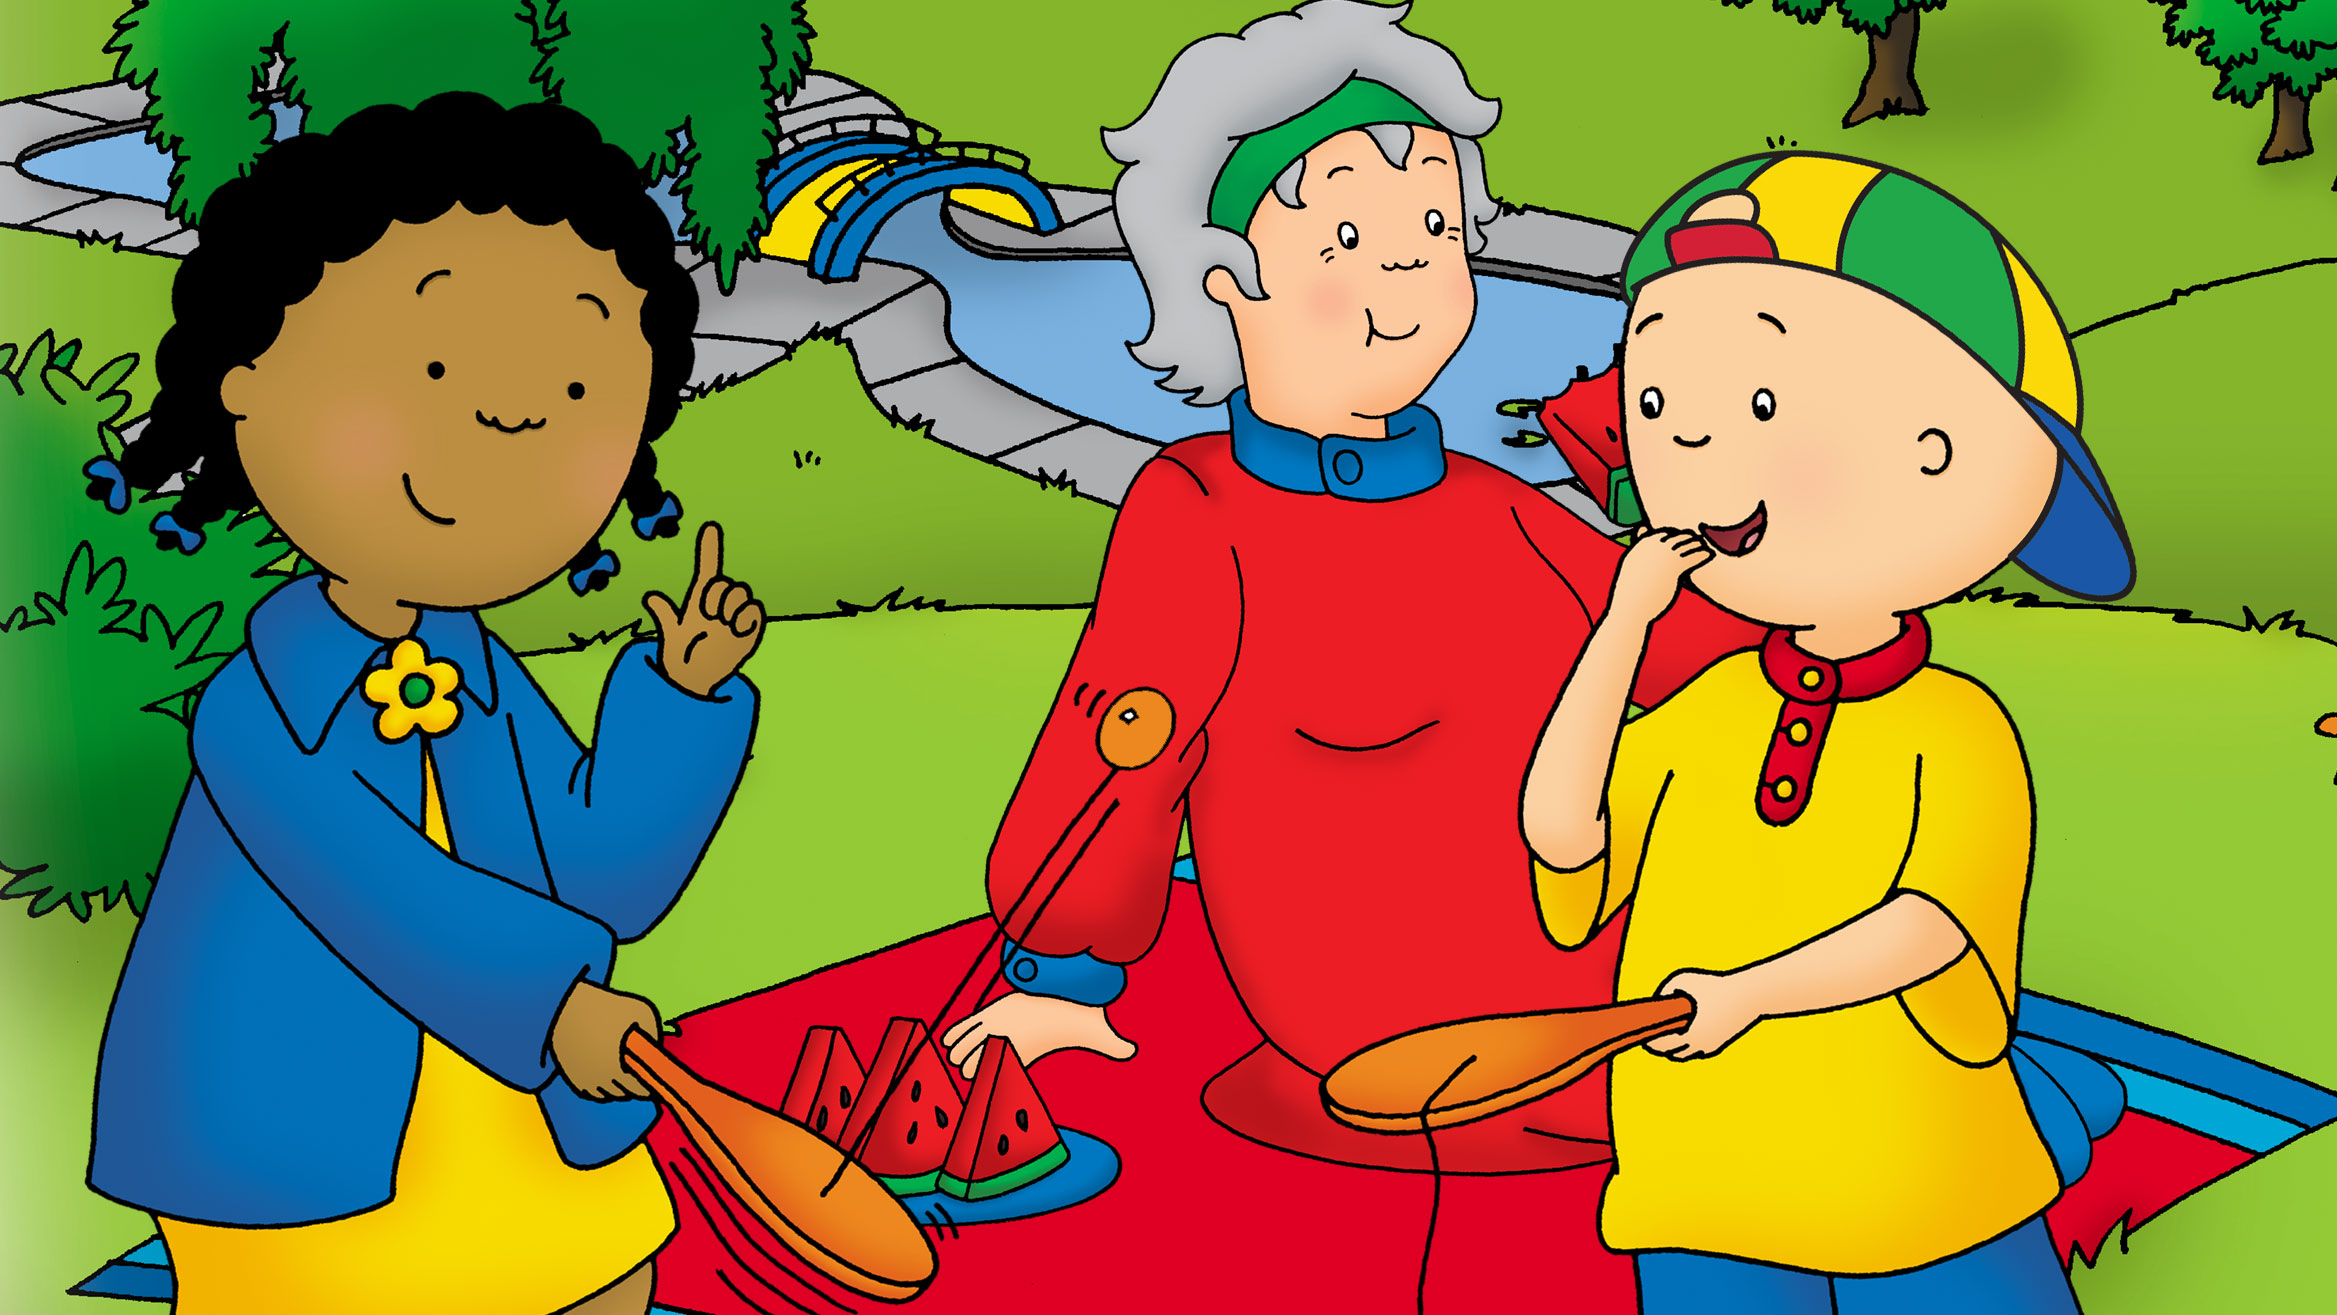 Caillou is partnering with PBS KIDS to promote Summer Learning! post image